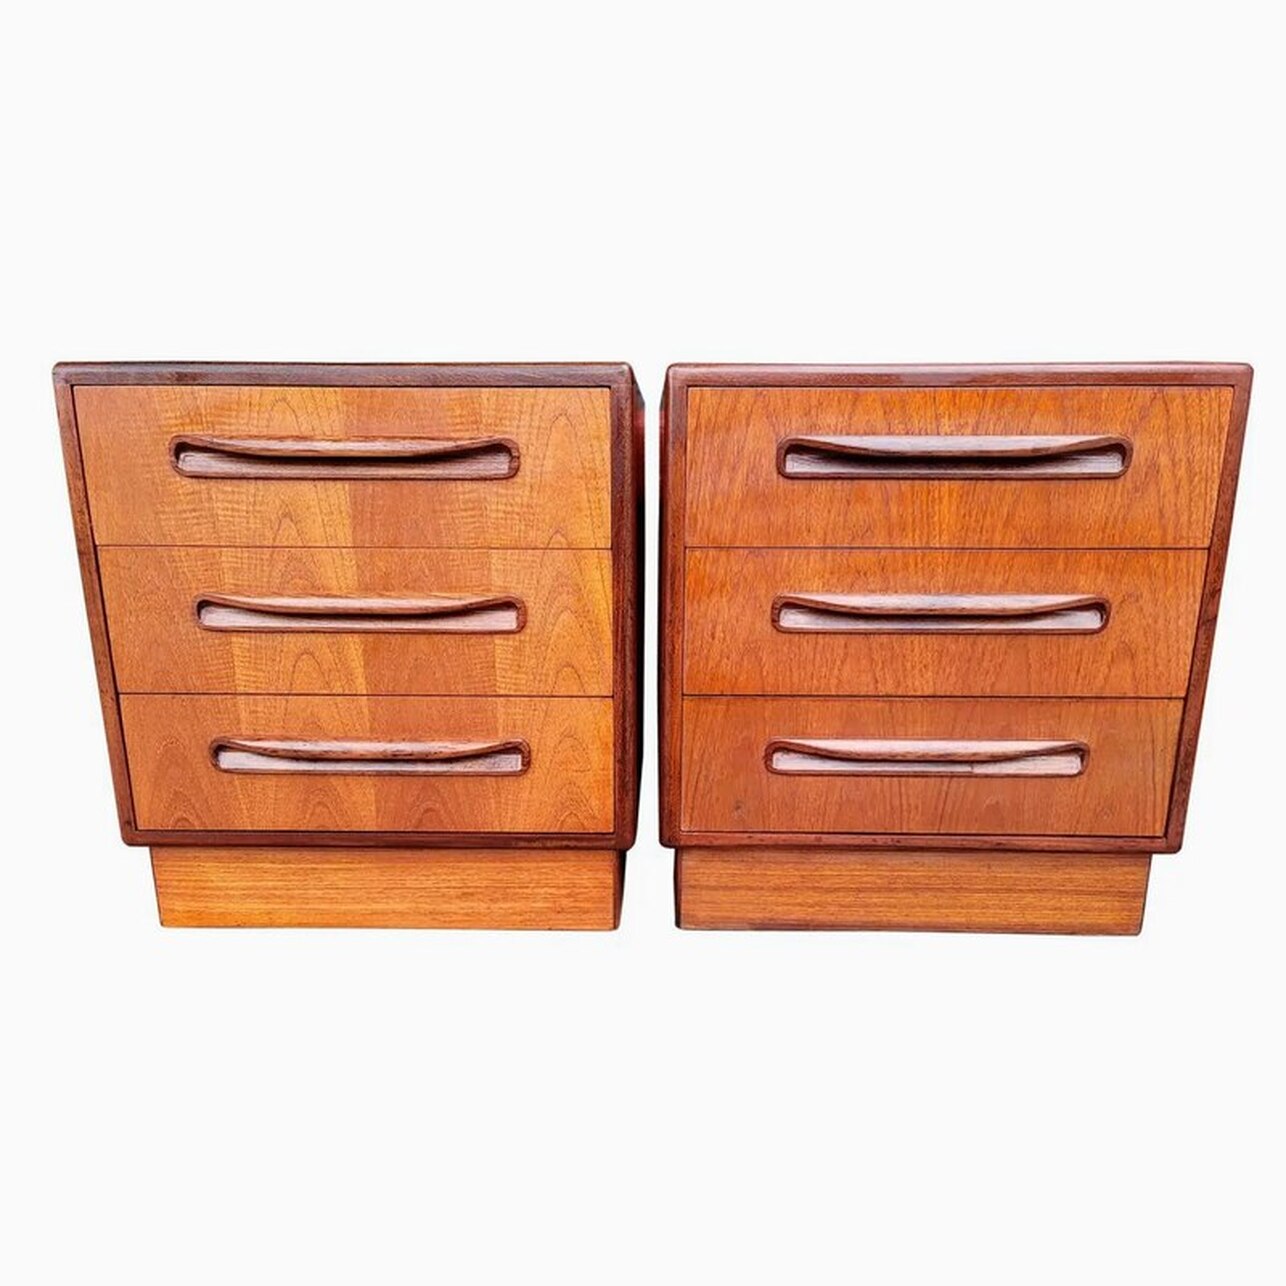 Pair bedside chests with three storage drawers surmounting plinth bases.  Teak veneers with solid afrormosia wood trim and pulls.  Designed by Victor Bramwell Wilkins for the E. Gomme G-Plan Fresco Range.